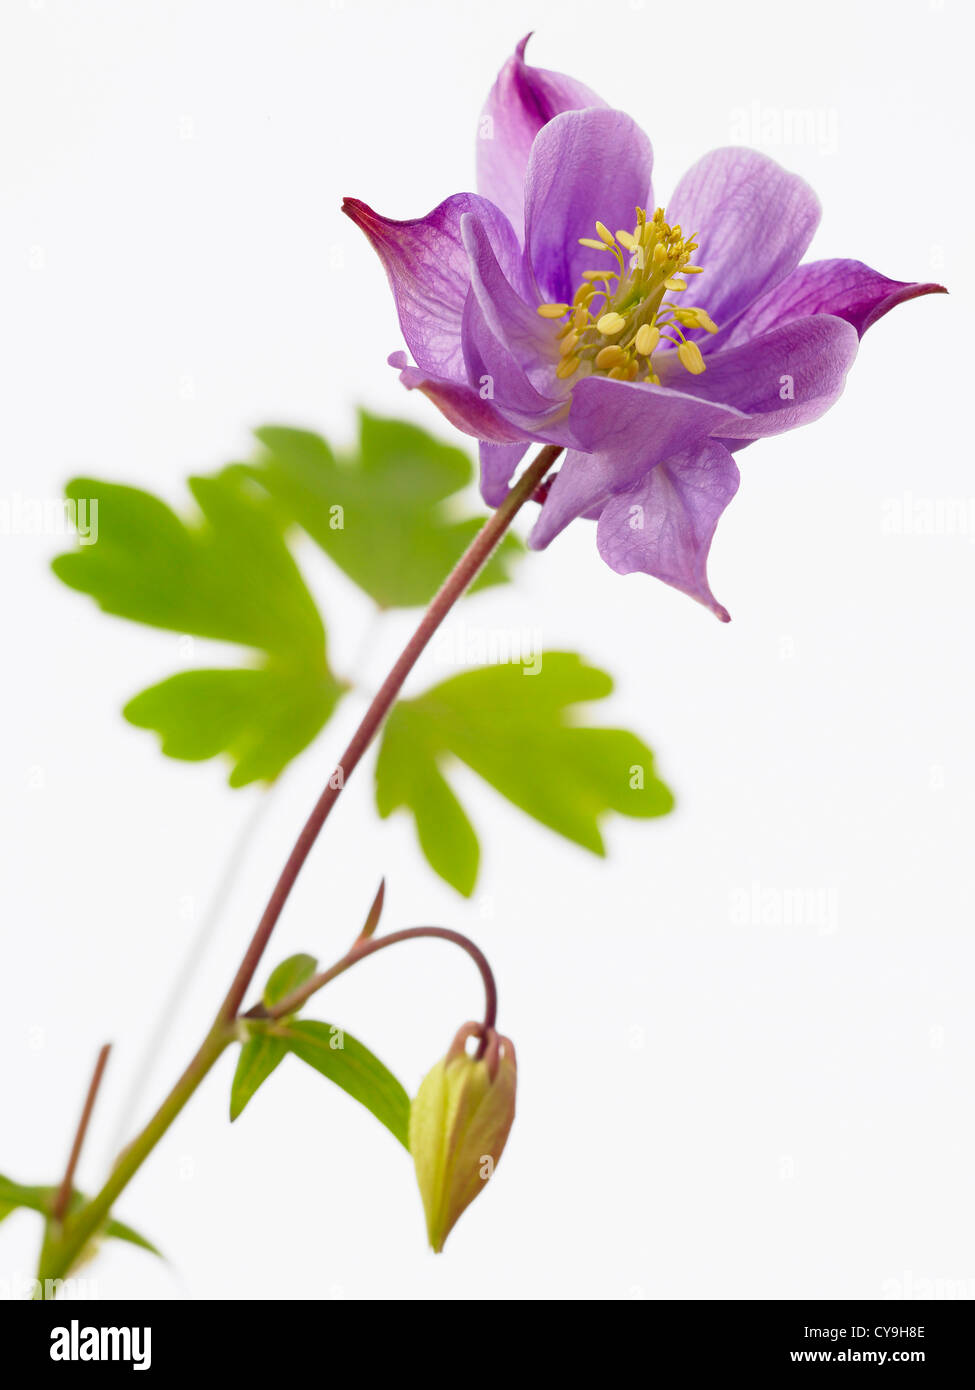 Aquilegia vulgaris, Columbine, Purple flower and bud on a stem against a white background. Stock Photo